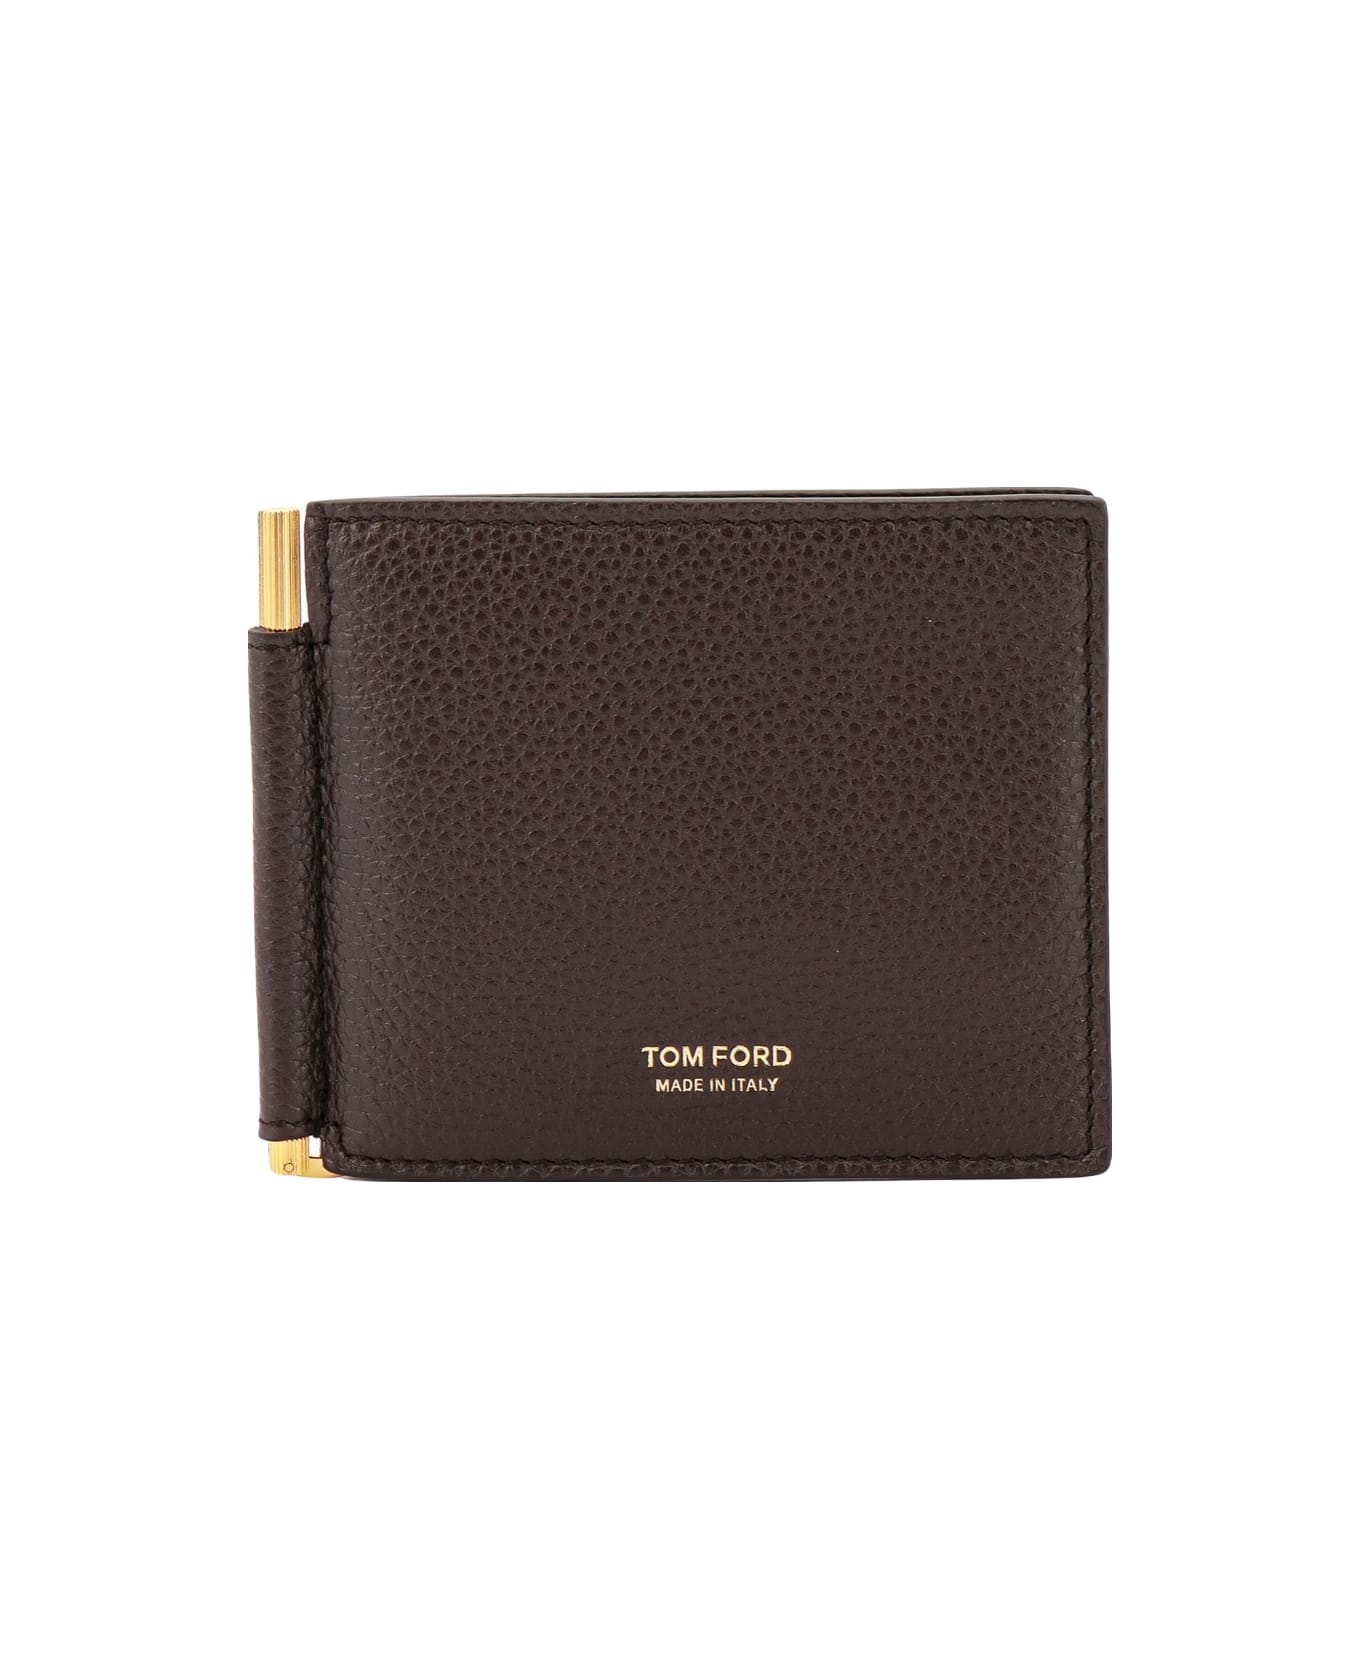 Tom Ford Card Holder - Brown 財布